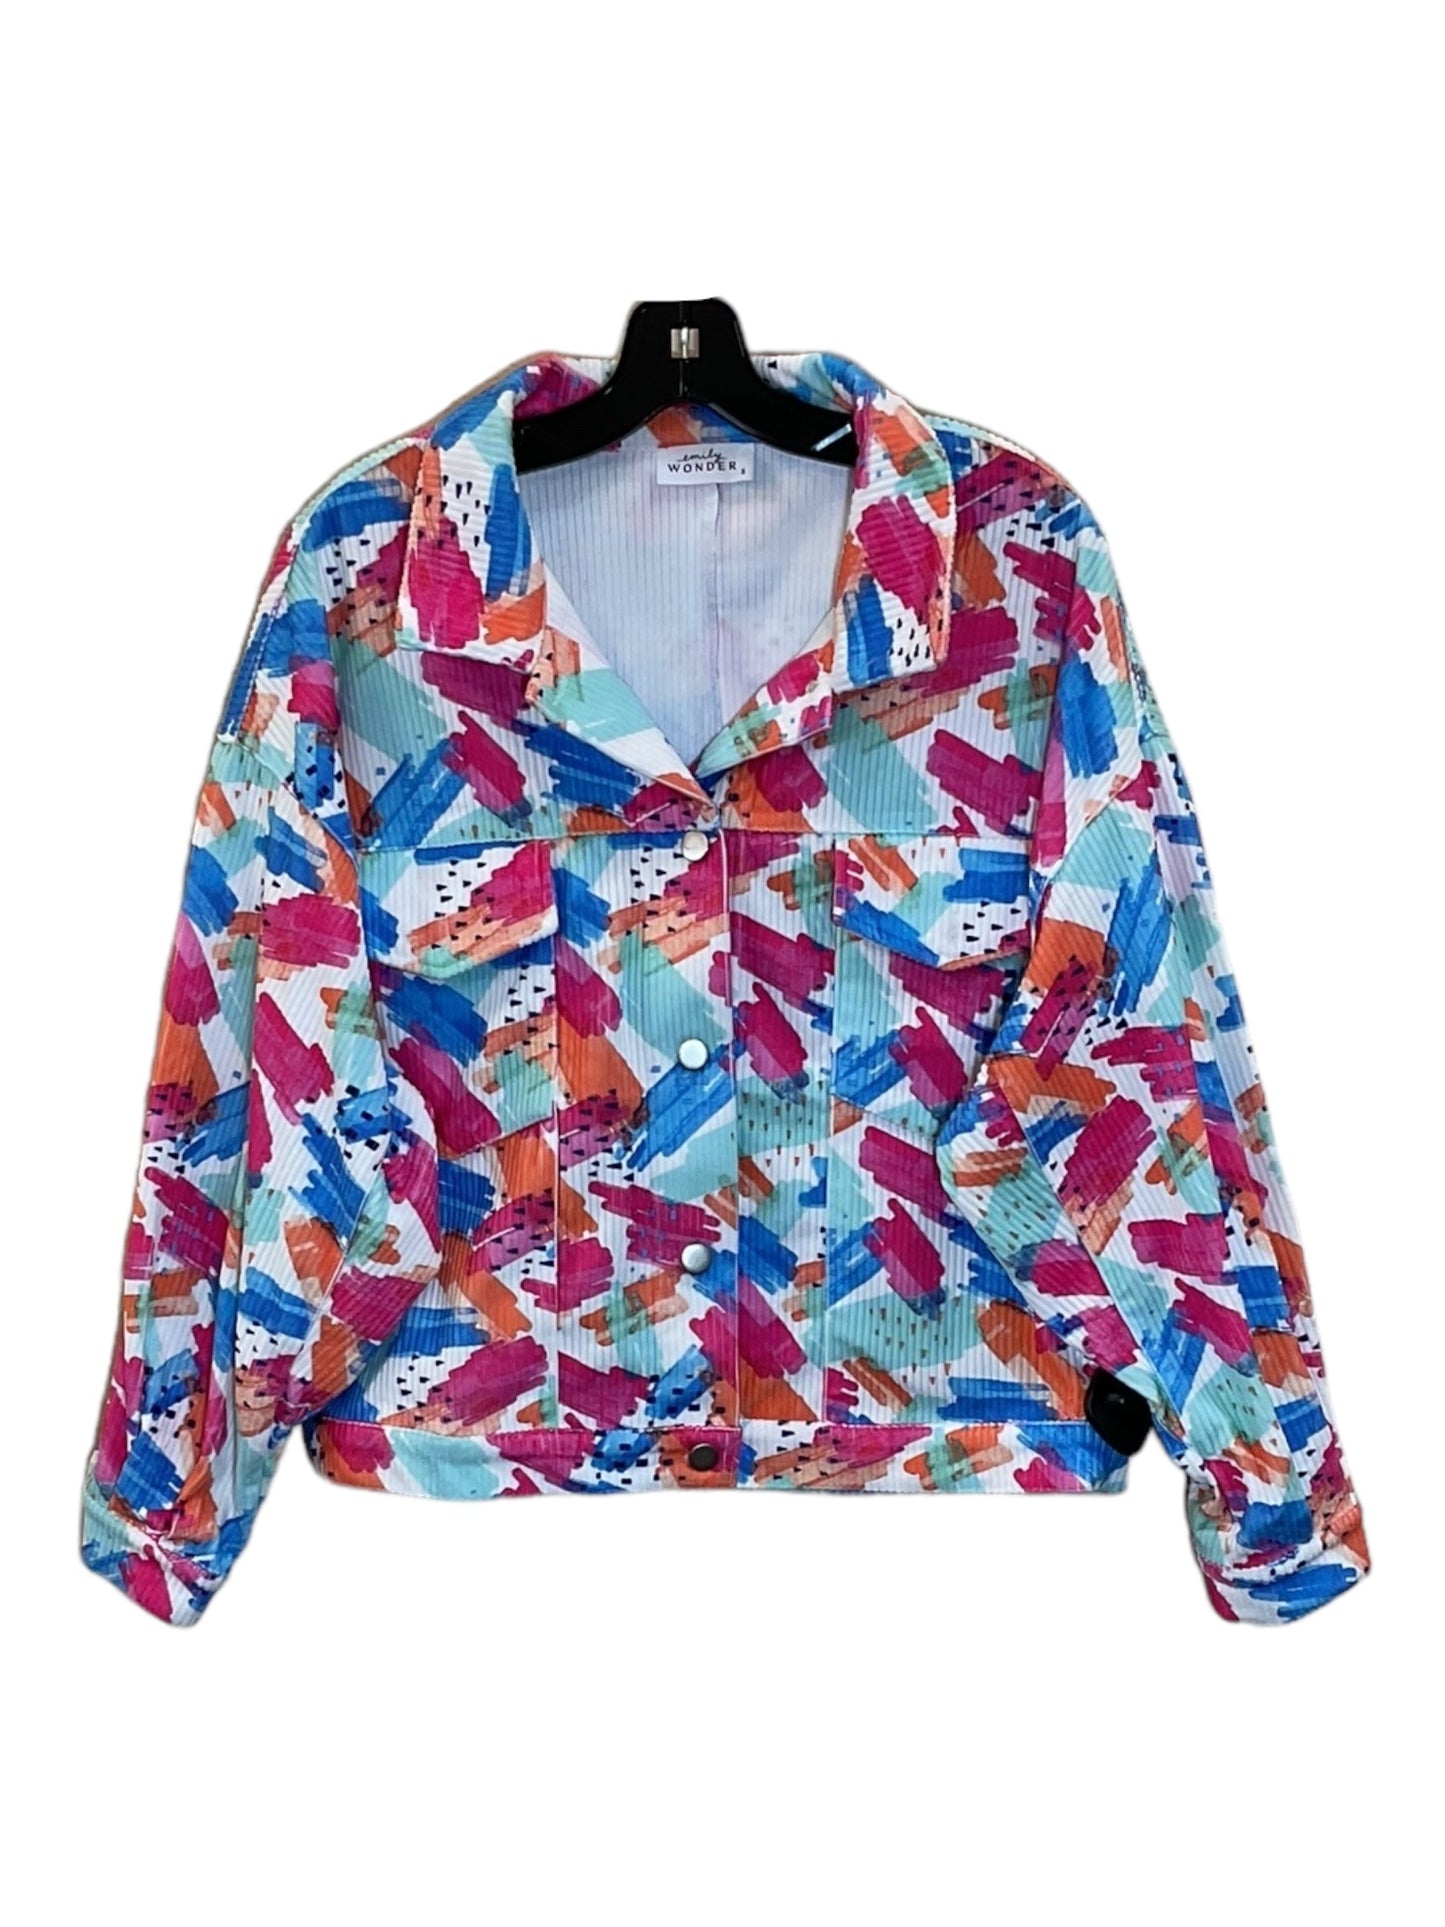 Multi-colored Jacket Other Clothes Mentor, Size S